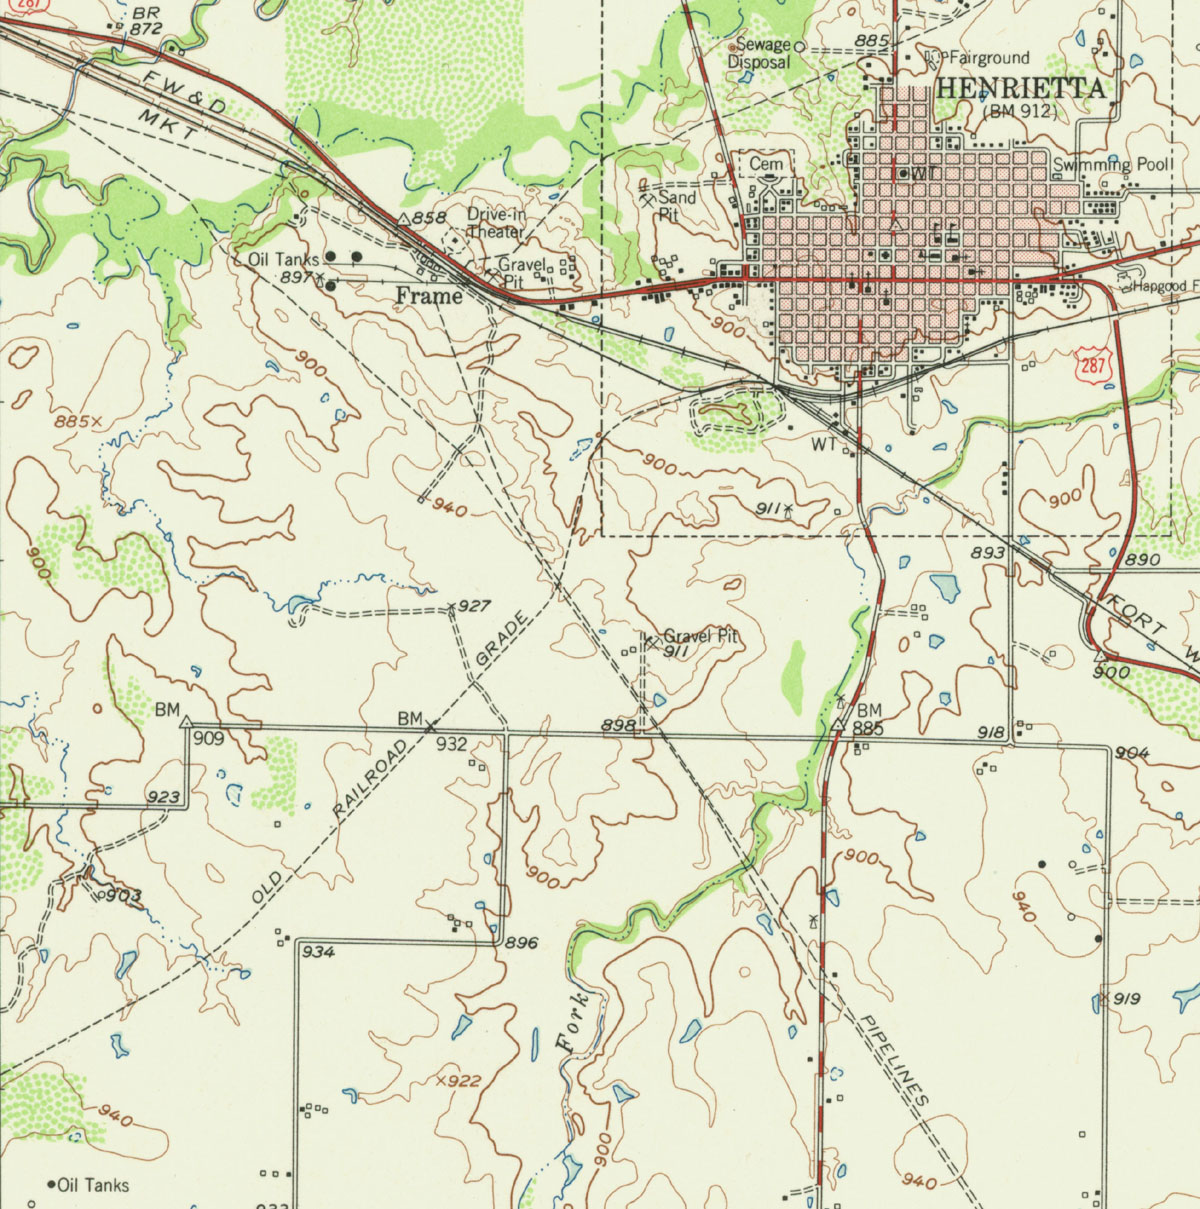 Southwestern Railway Company (Tex.), Map Showing Abandoned Route Southwest of Henrietta, Texas in 1956.